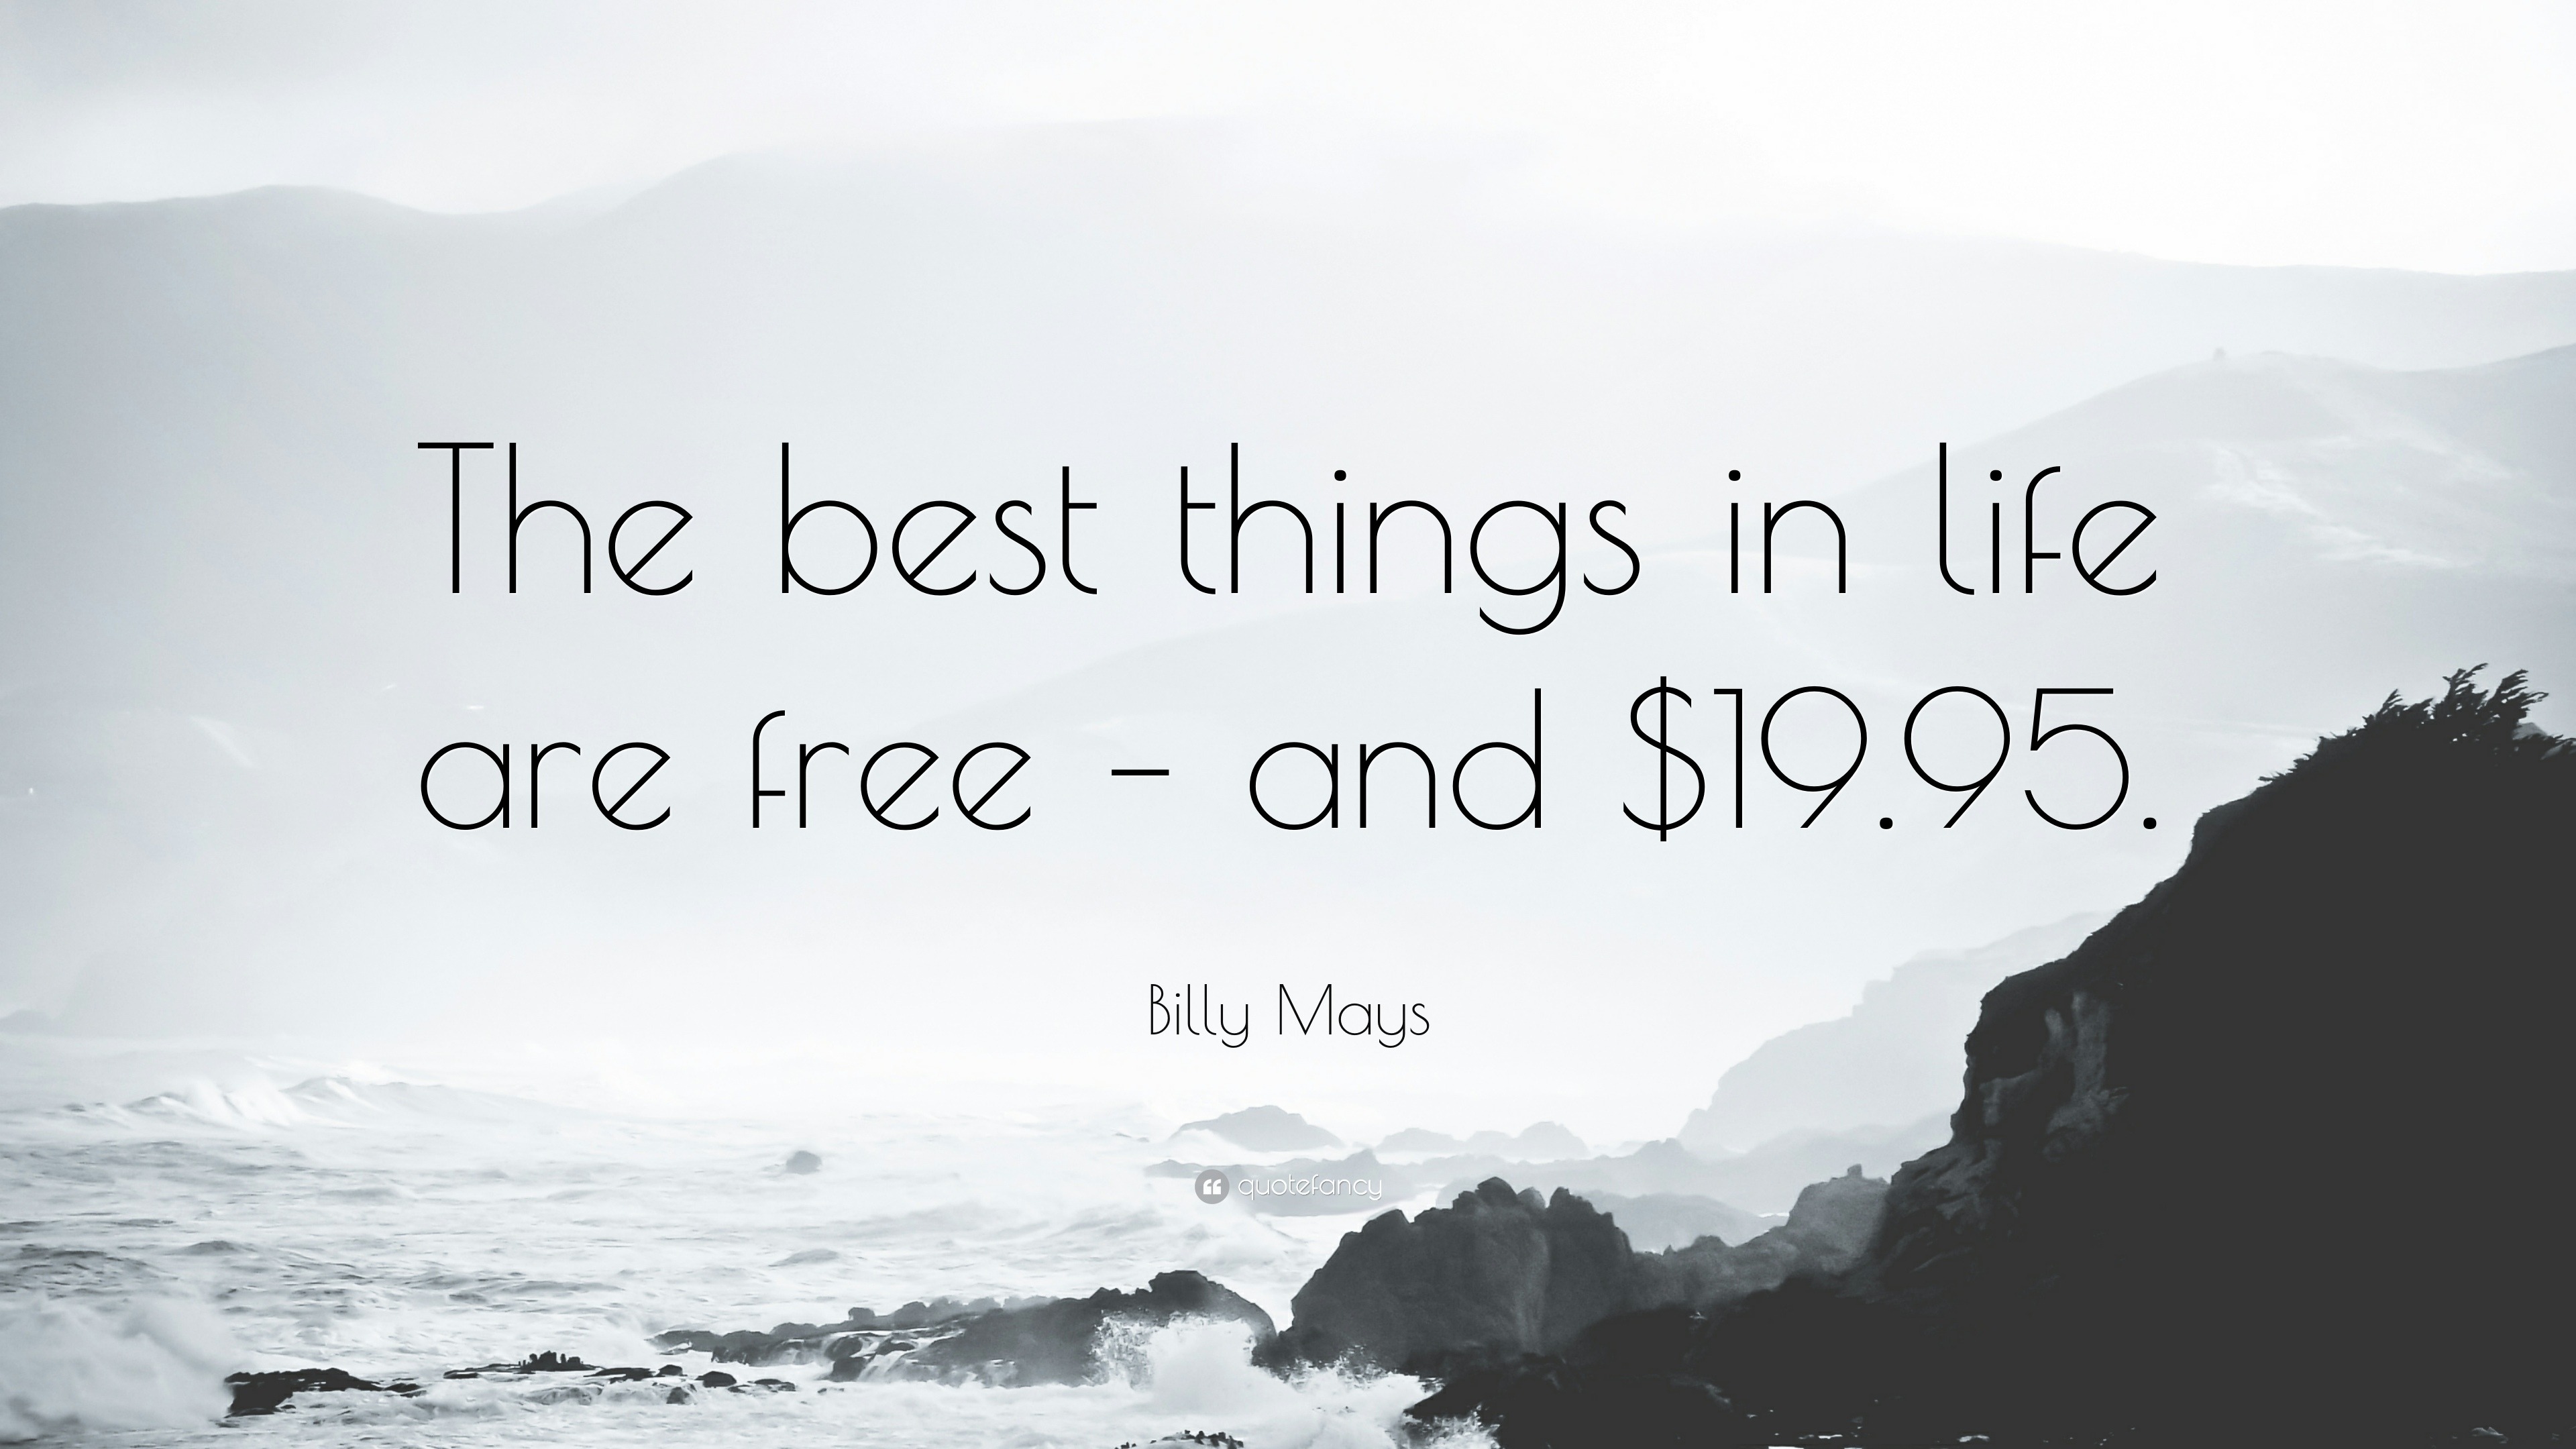 Sarcastic Quotes “The best things in life are free – and $19 95 ”